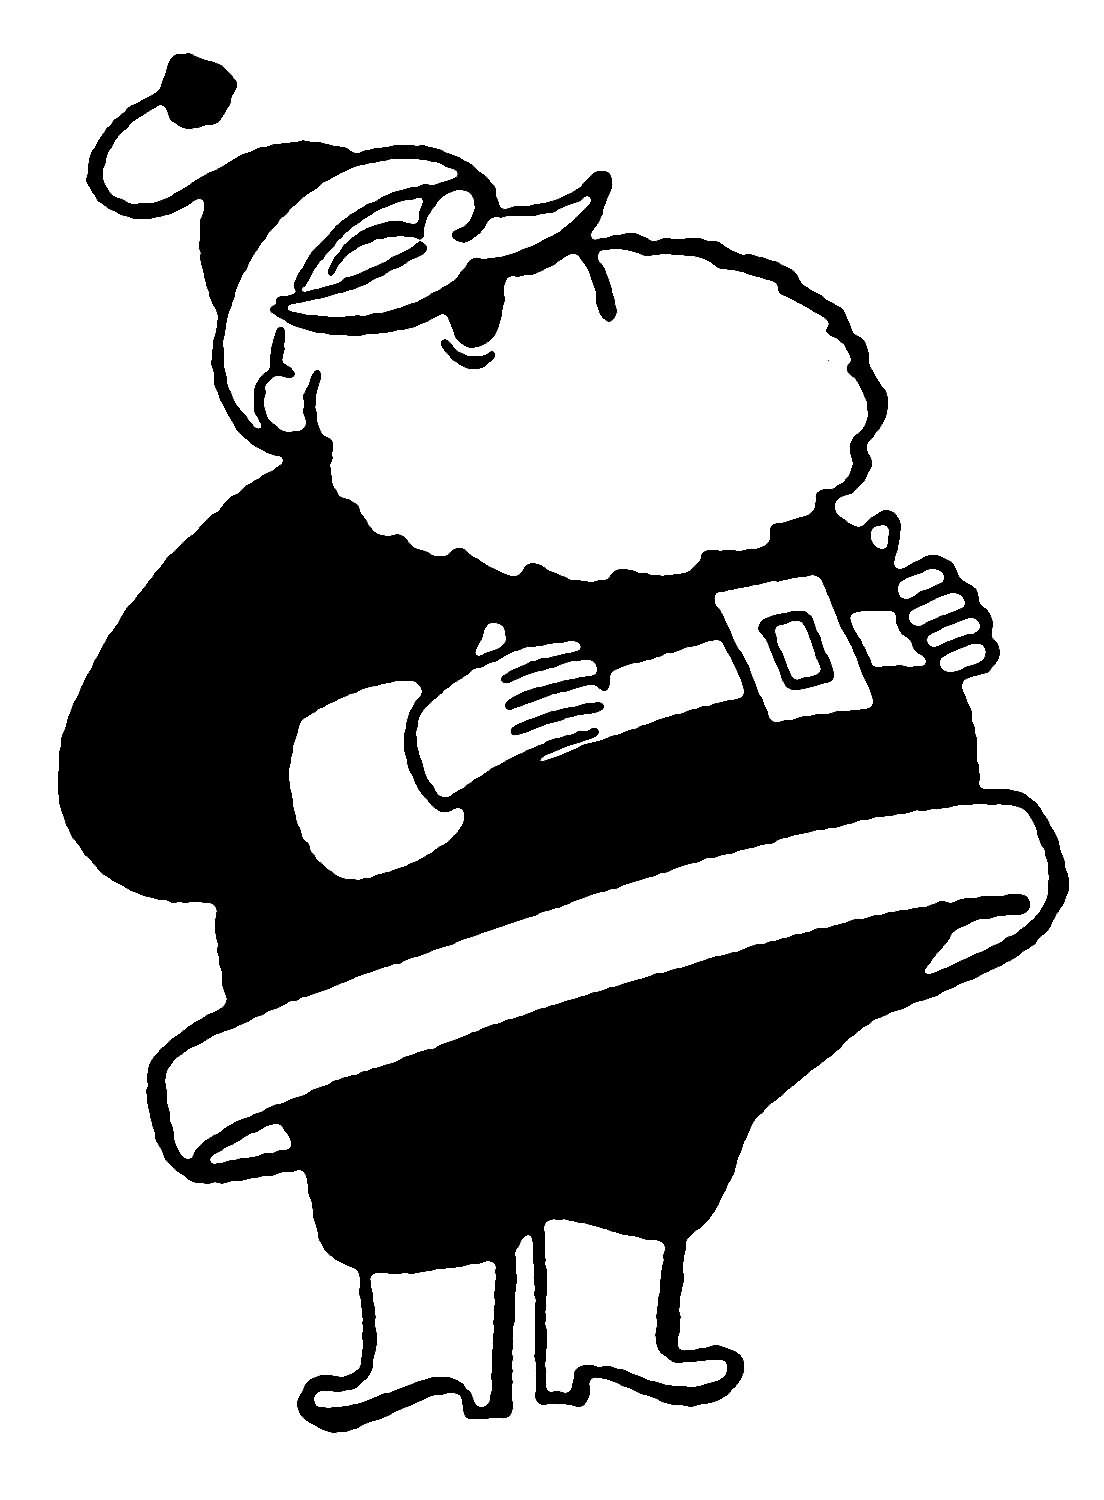 Funny Black And White Santa Clause Laughing Picture